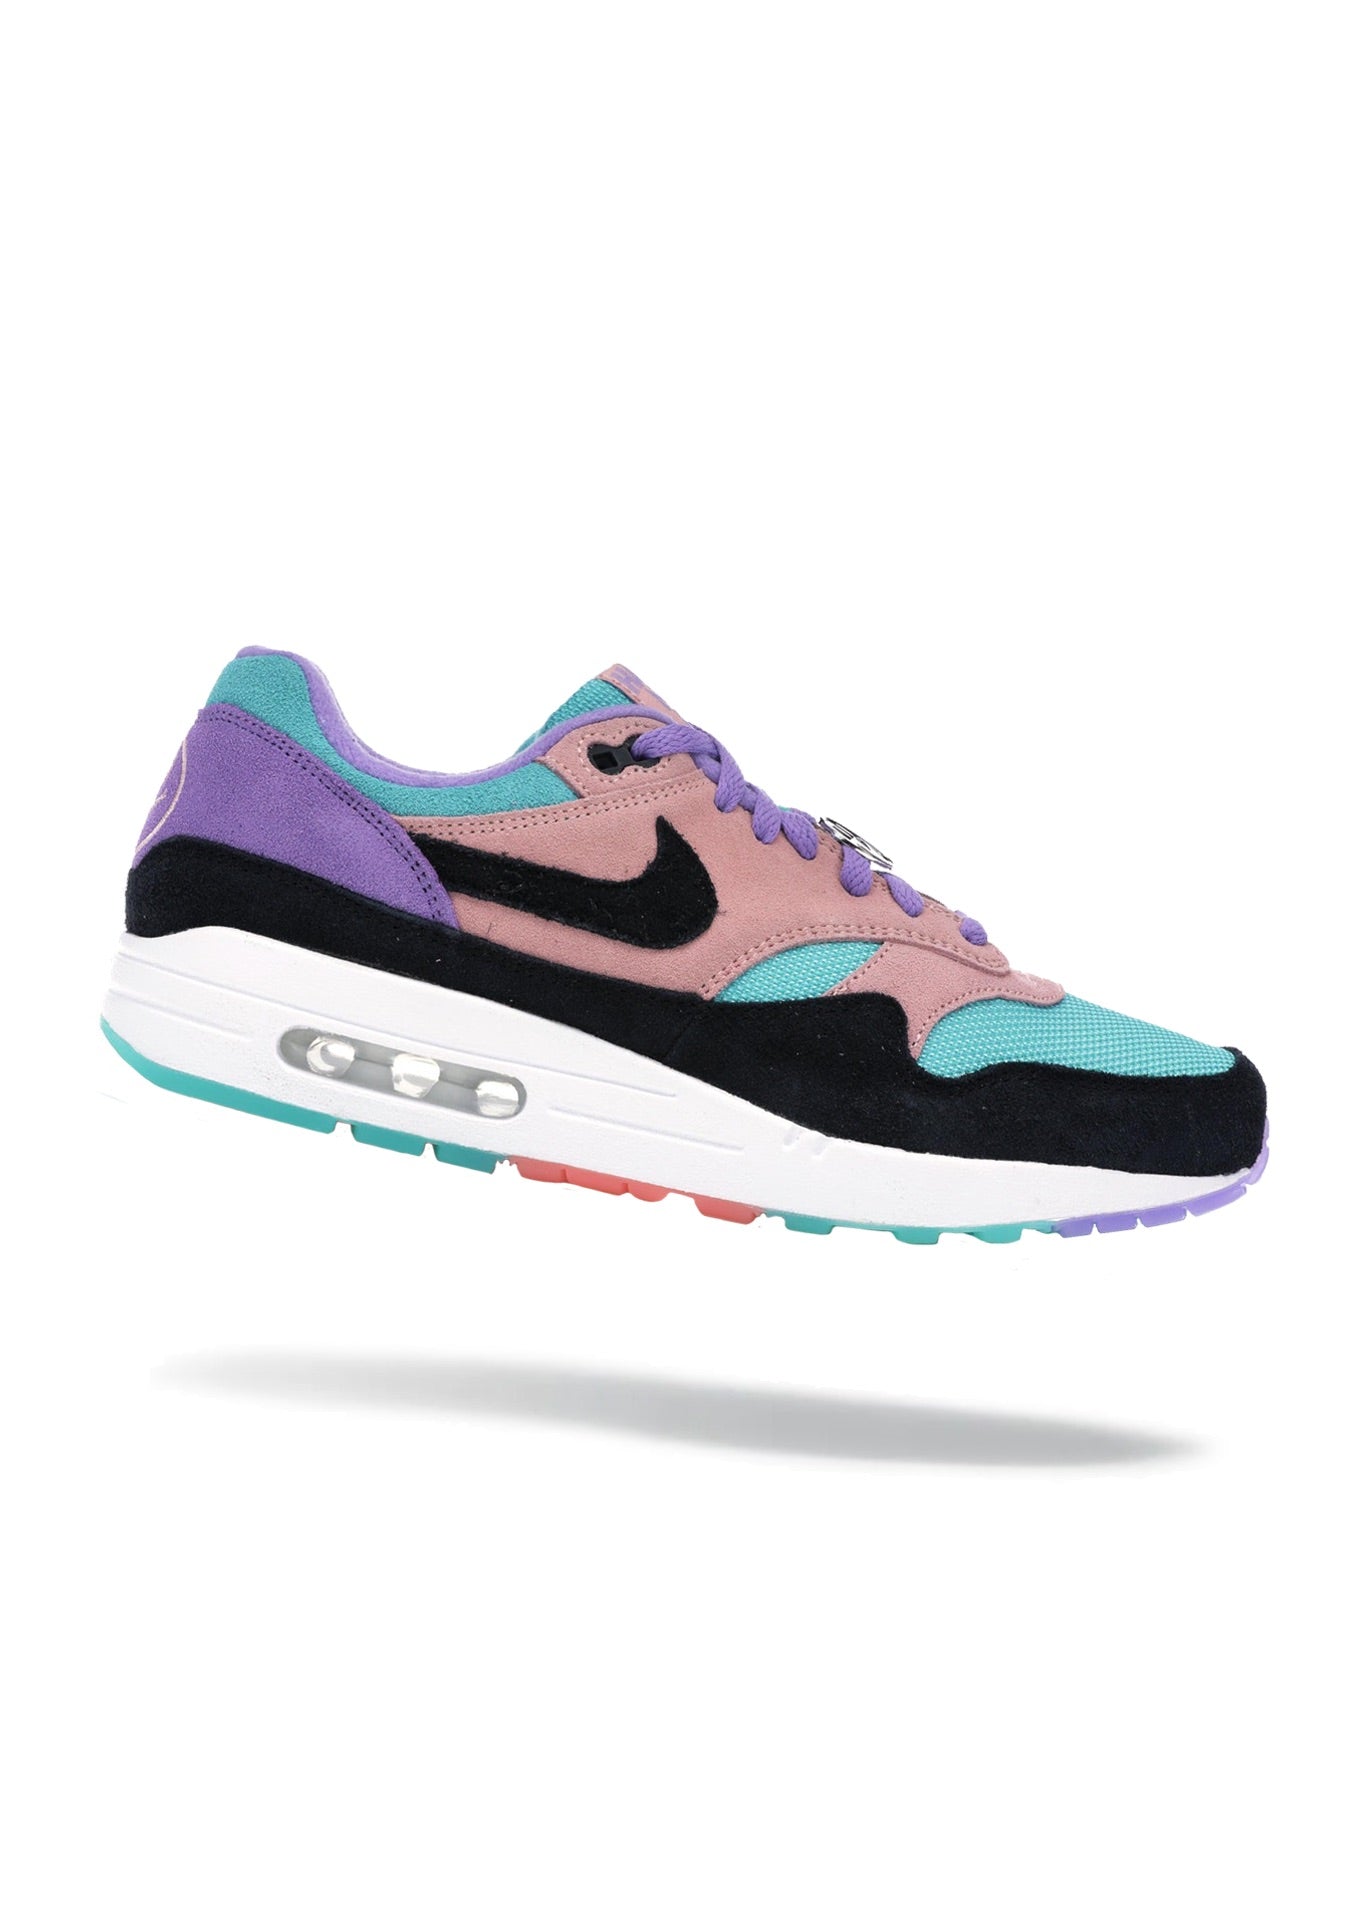 Air Max 1 “Have a Nike day”